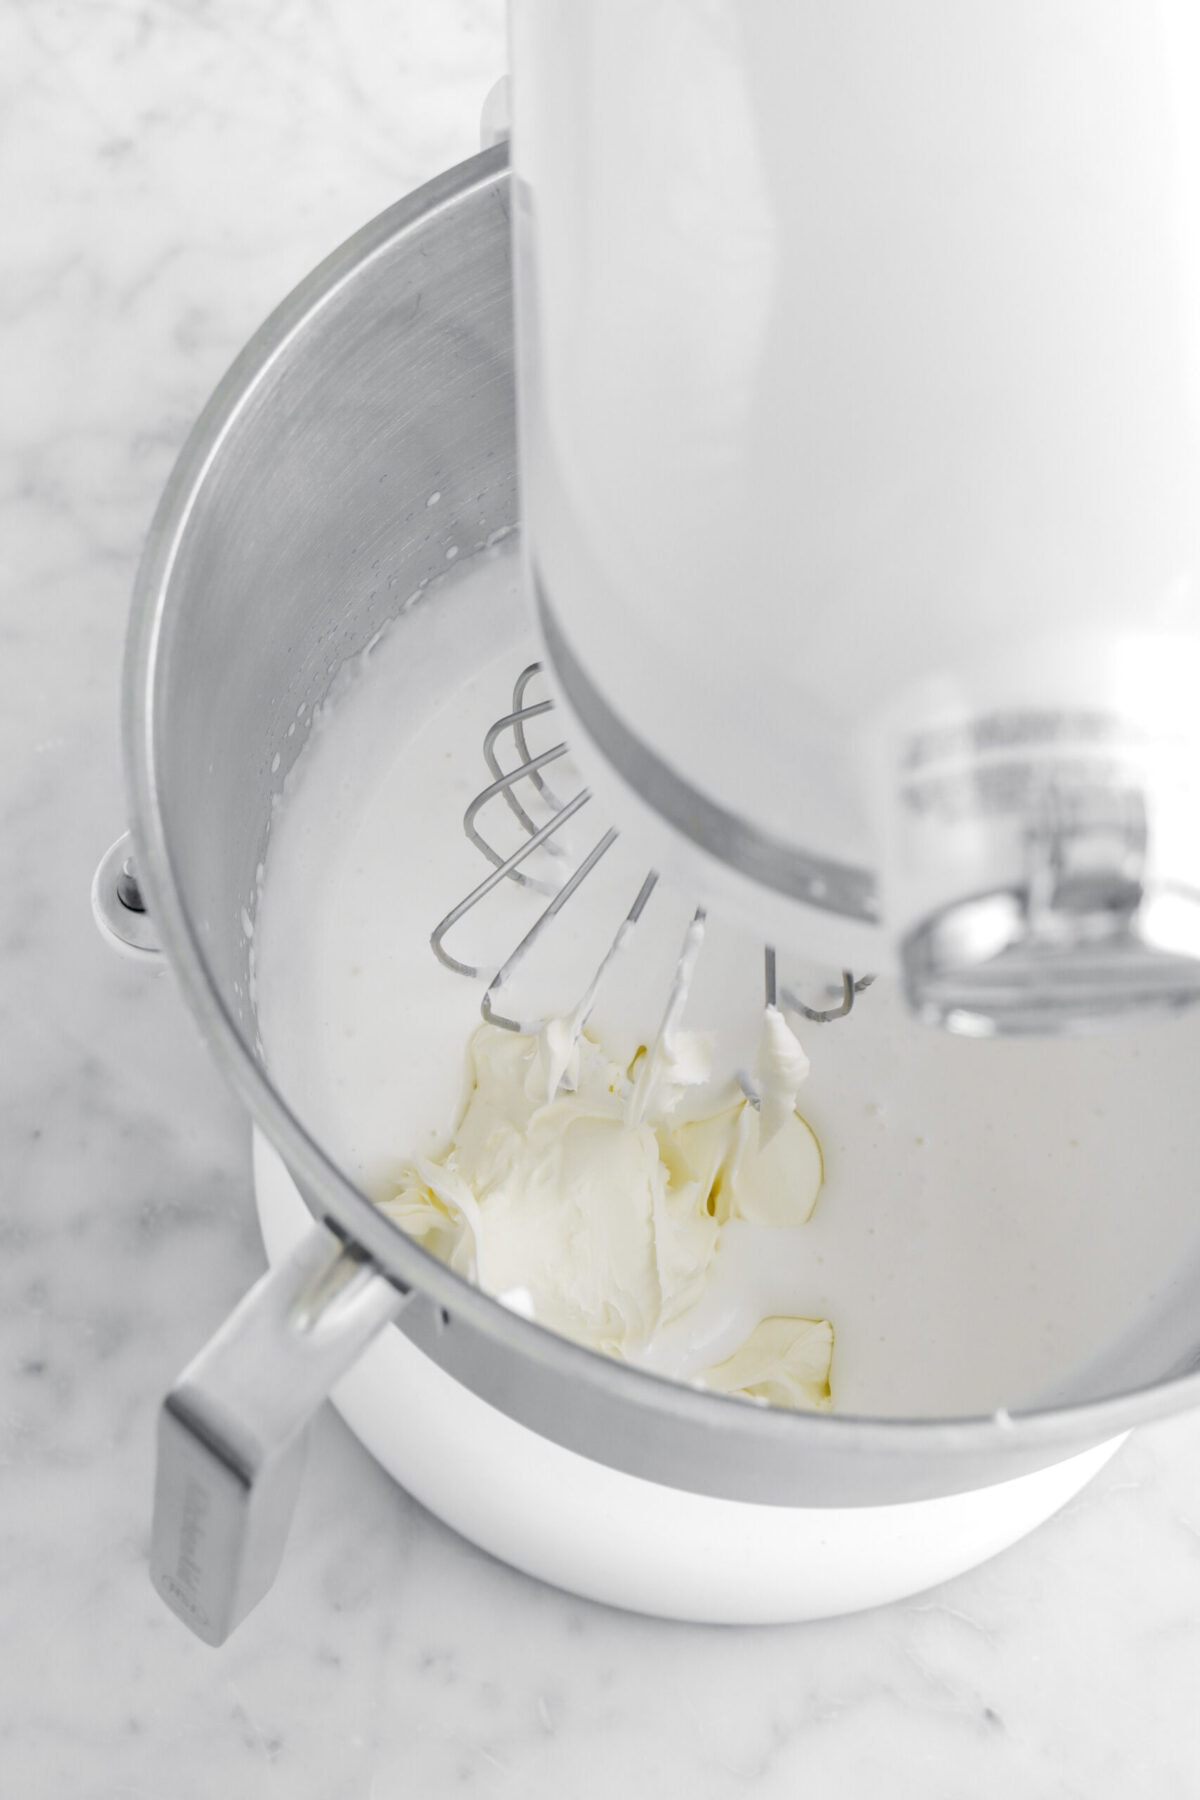 whipped cream and mascarpone in stand mixer.